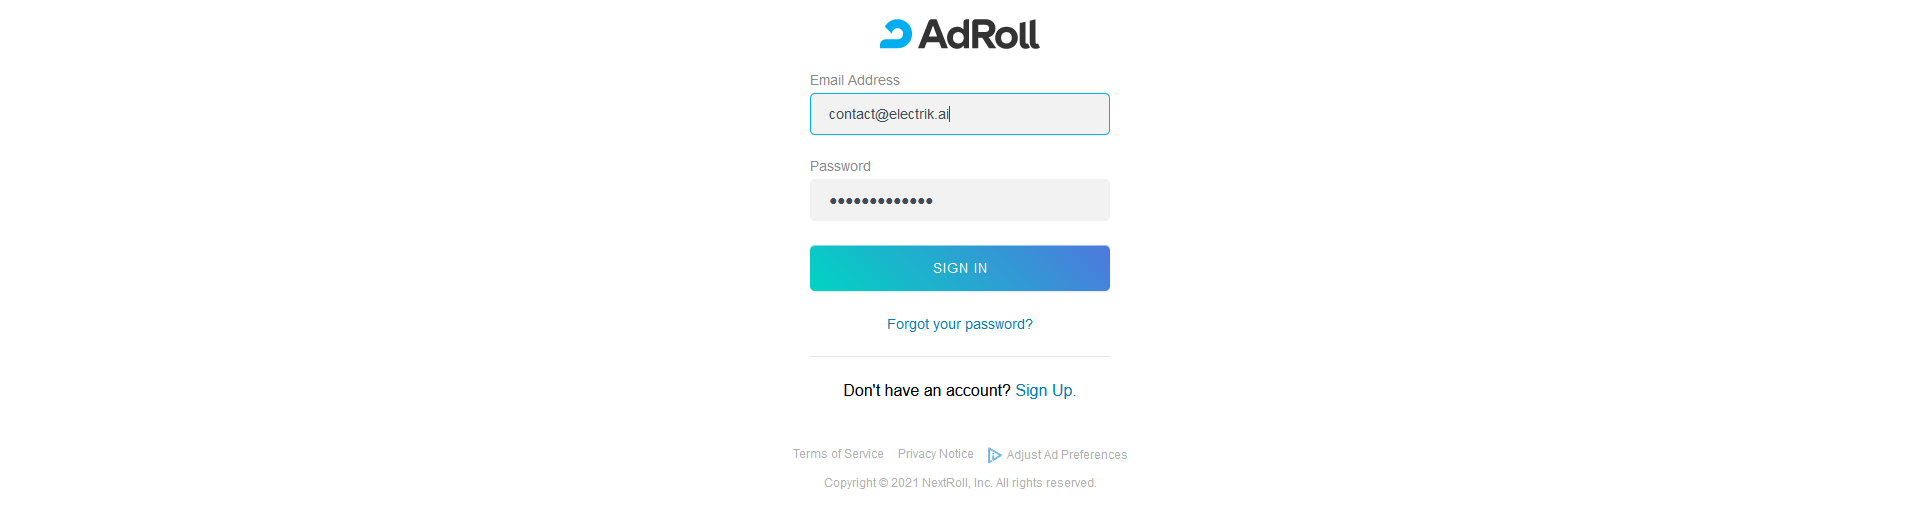 Provide your AdRoll account User Id and Password